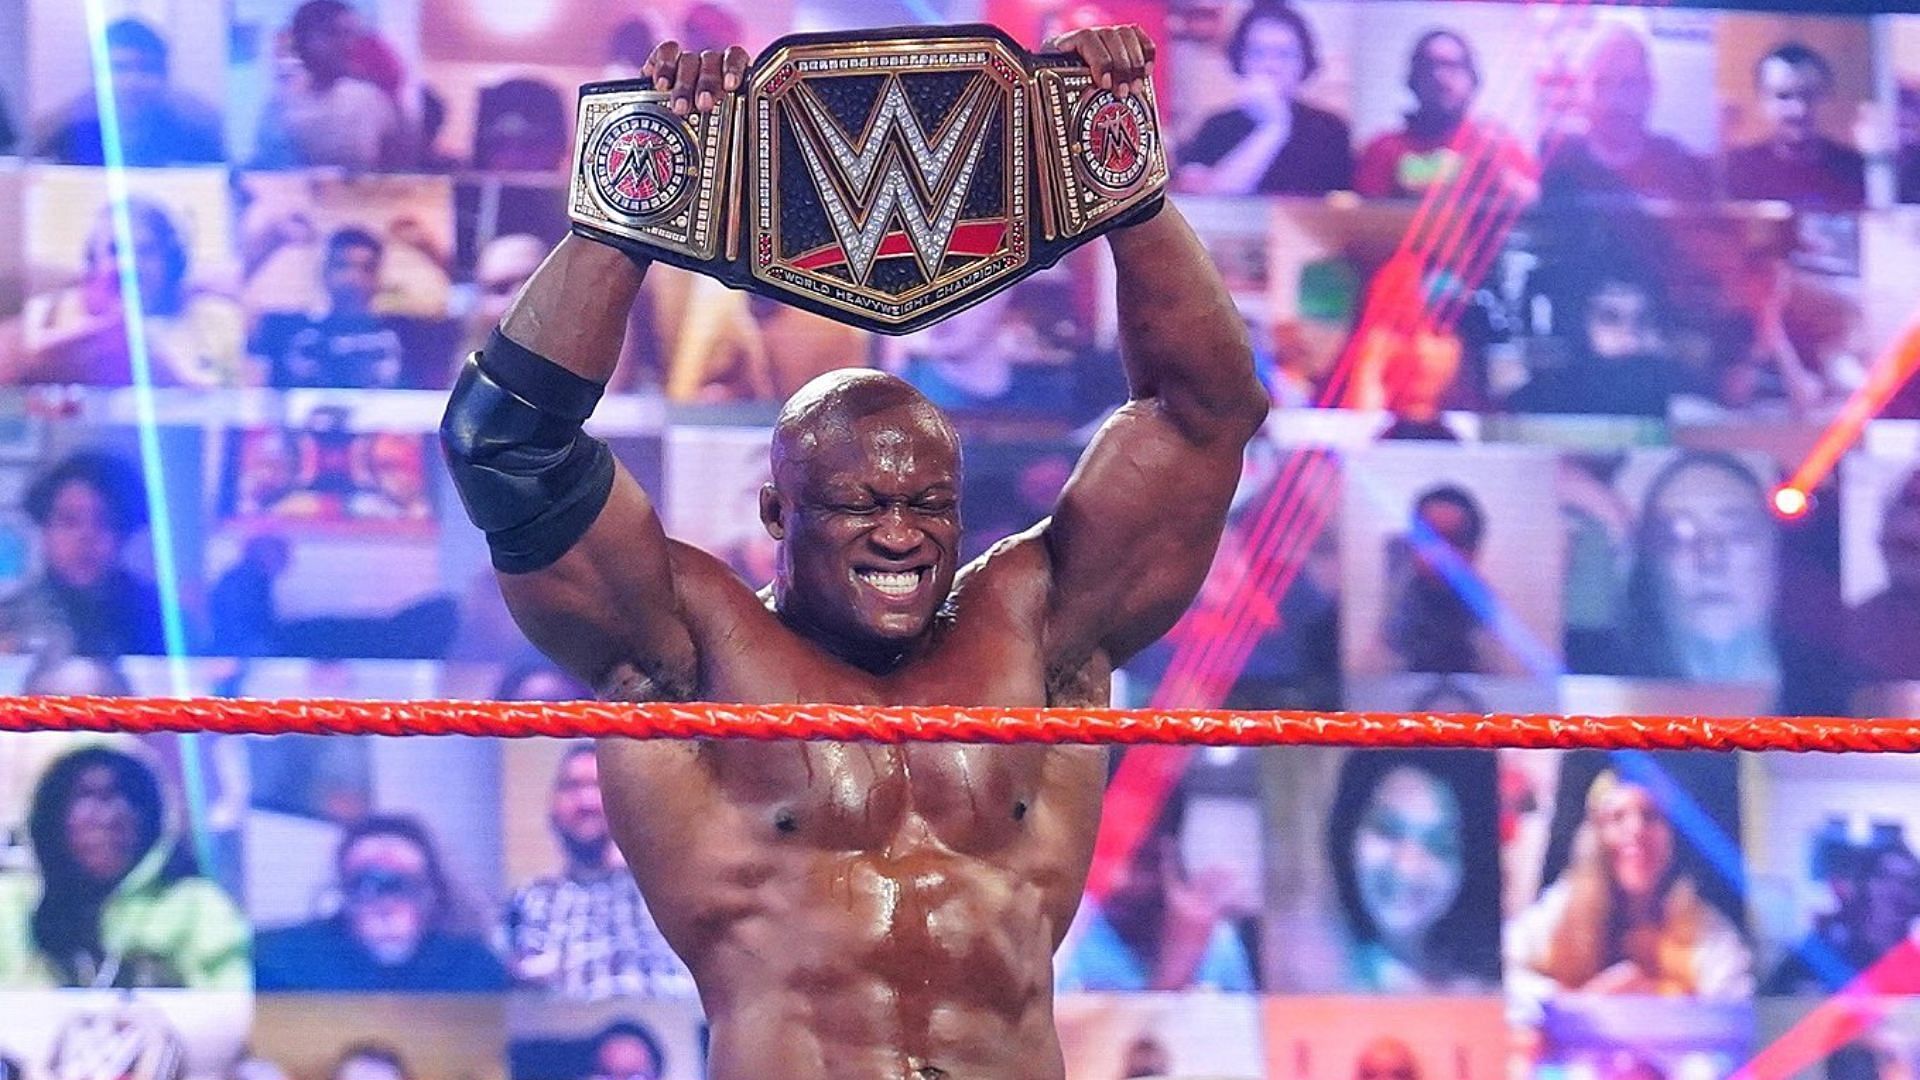 Bobby Lashley won his first WWE Championship in 2021.